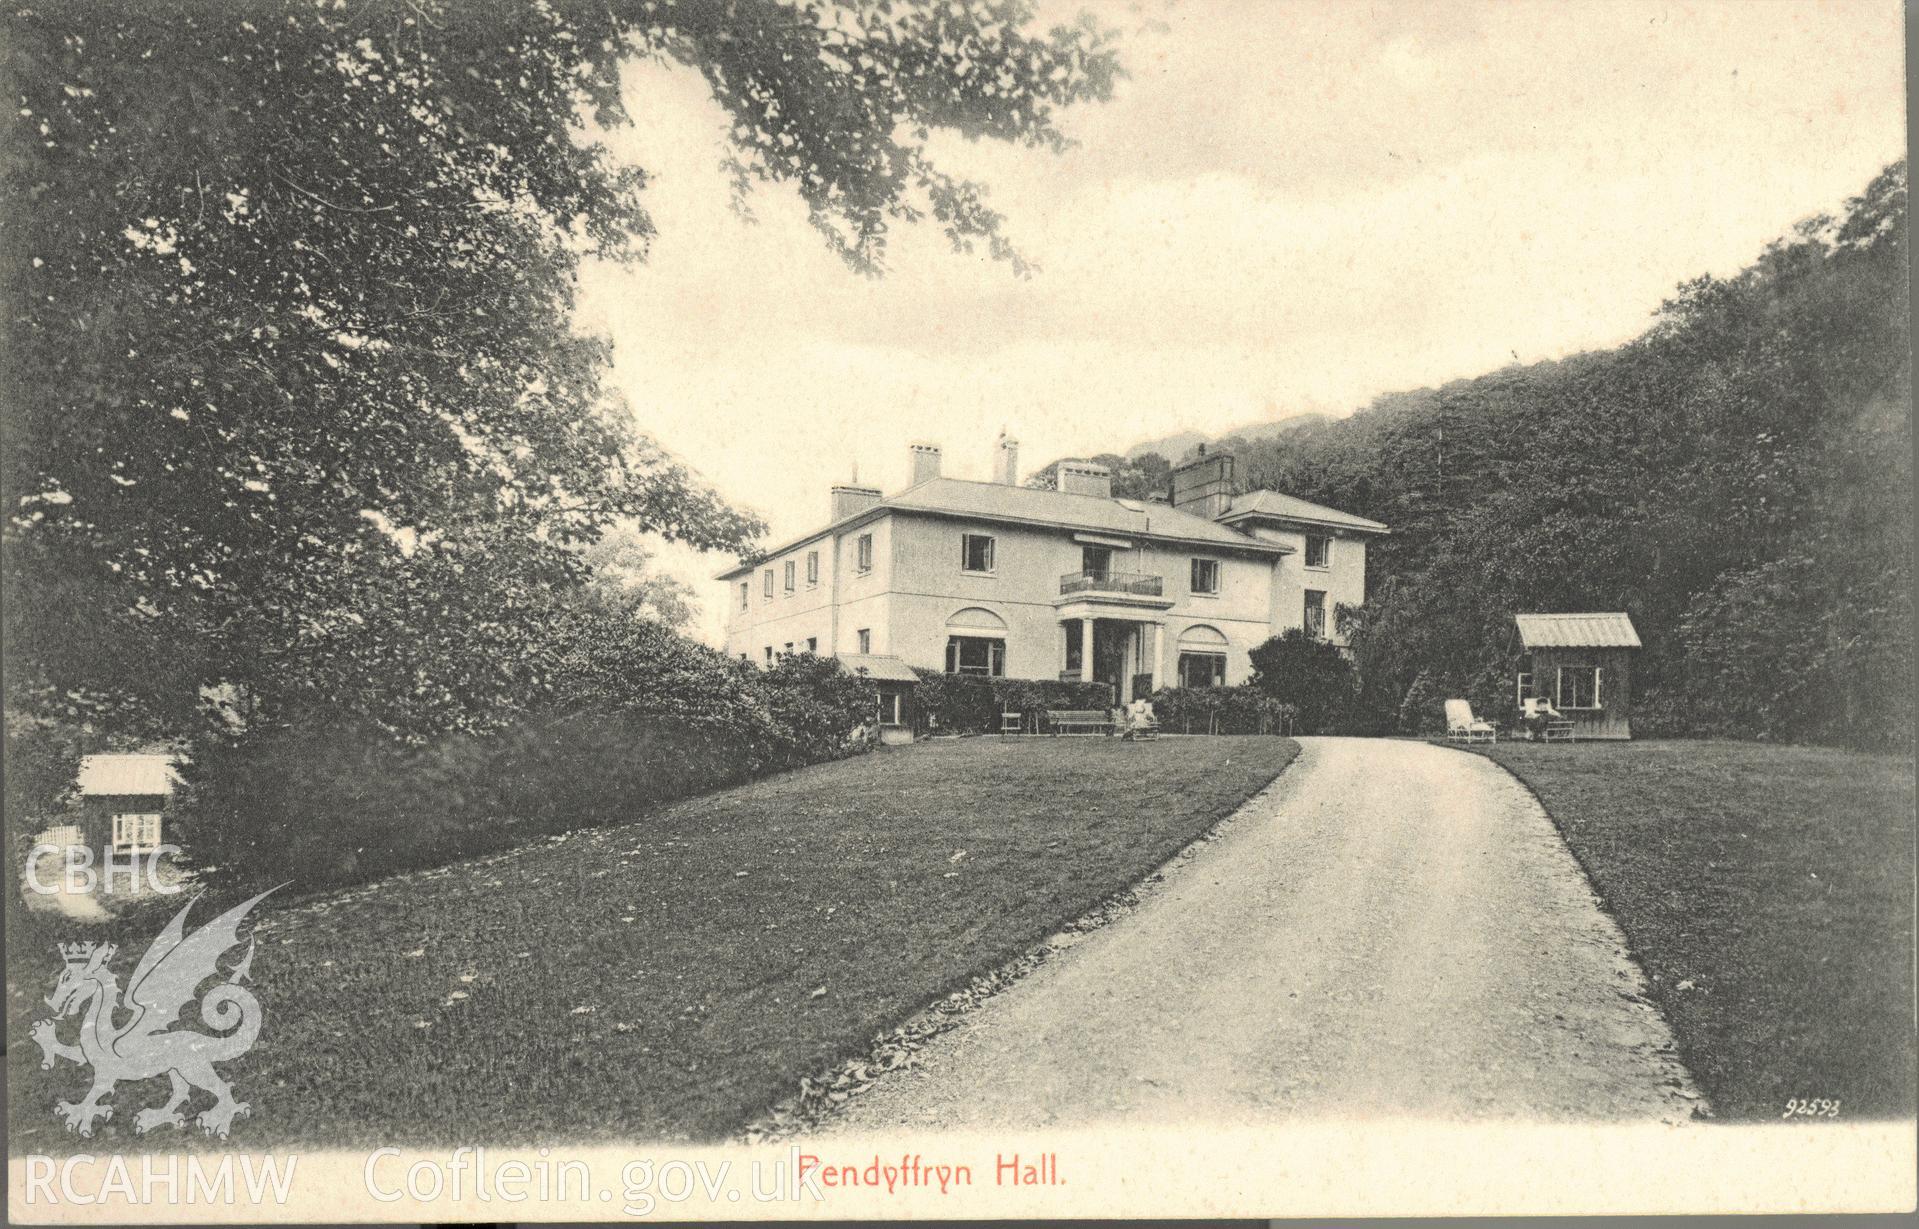 Digitised postcard image of Pendyffryn Hall, Penmaenmawr, the Scientific Press Ltd. Produced by Parks and Gardens Data Services, from an original item in the Peter Davis Collection at Parks and Gardens UK. We hold only web-resolution images of this collection, suitable for viewing on screen and for research purposes only. We do not hold the original images, or publication quality scans.